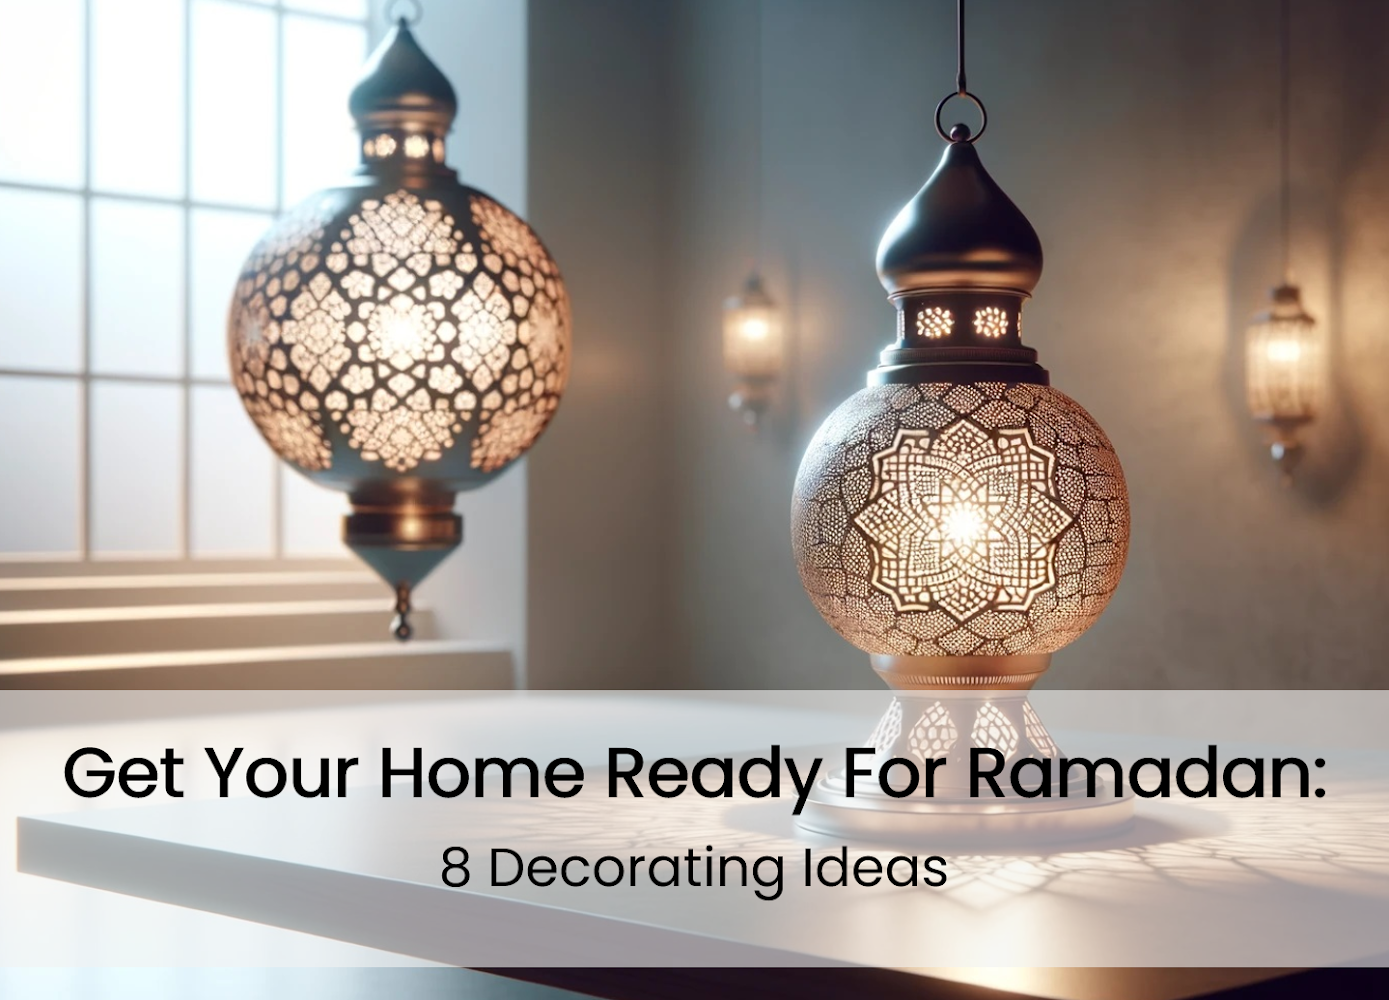 Get Your Home Ready for Ramadan: 8 Decorating Ideas